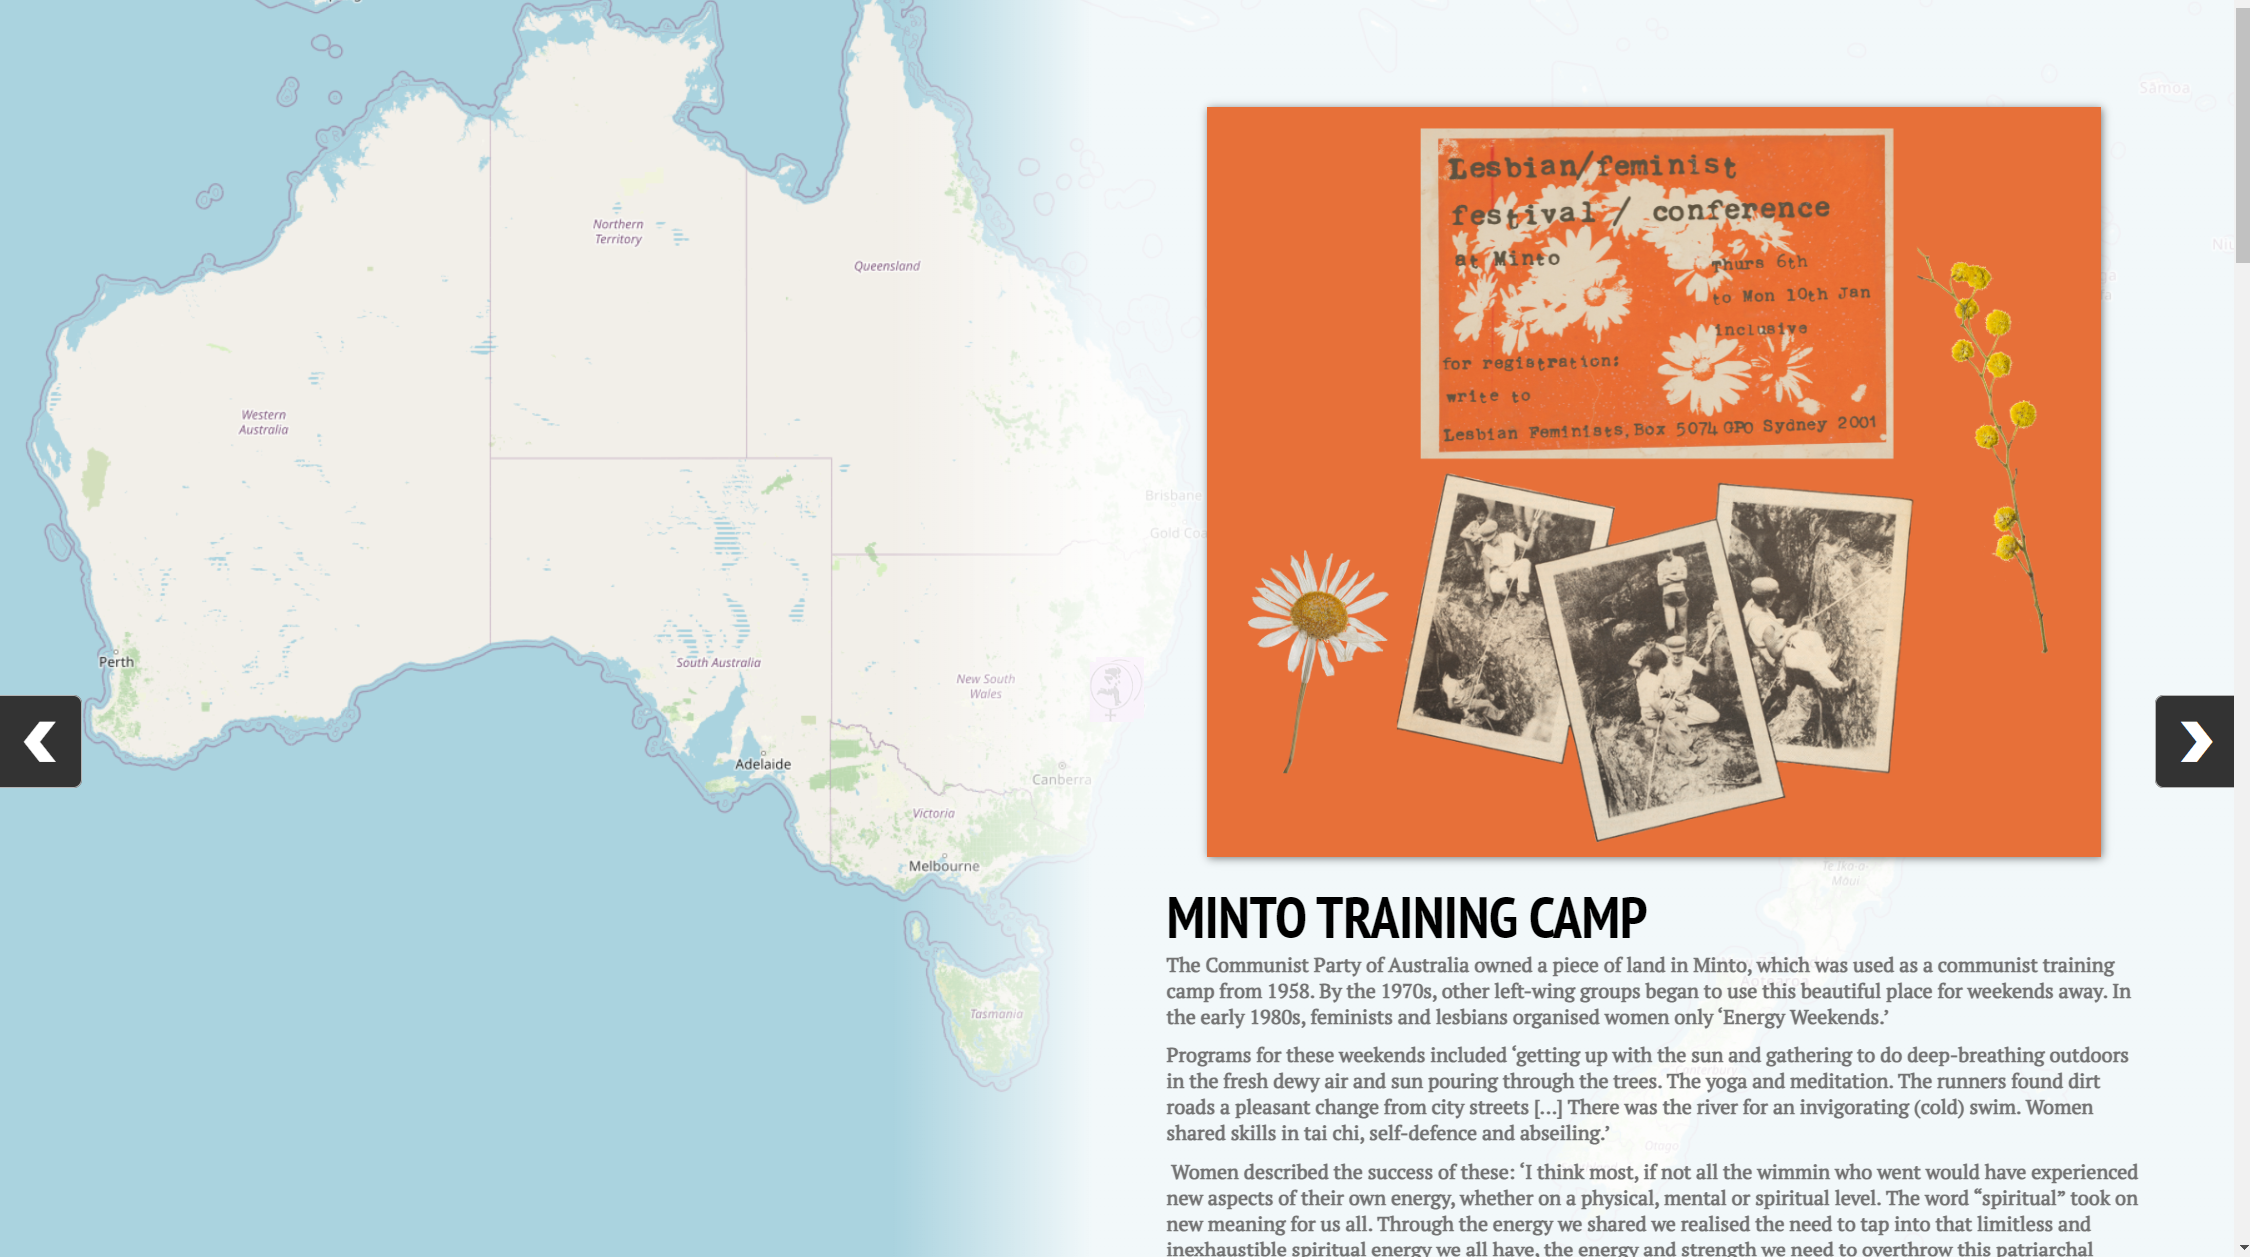 Sporty lesbians and fit feminists: a map of women’s sports in 1970s and 1980s Sydney